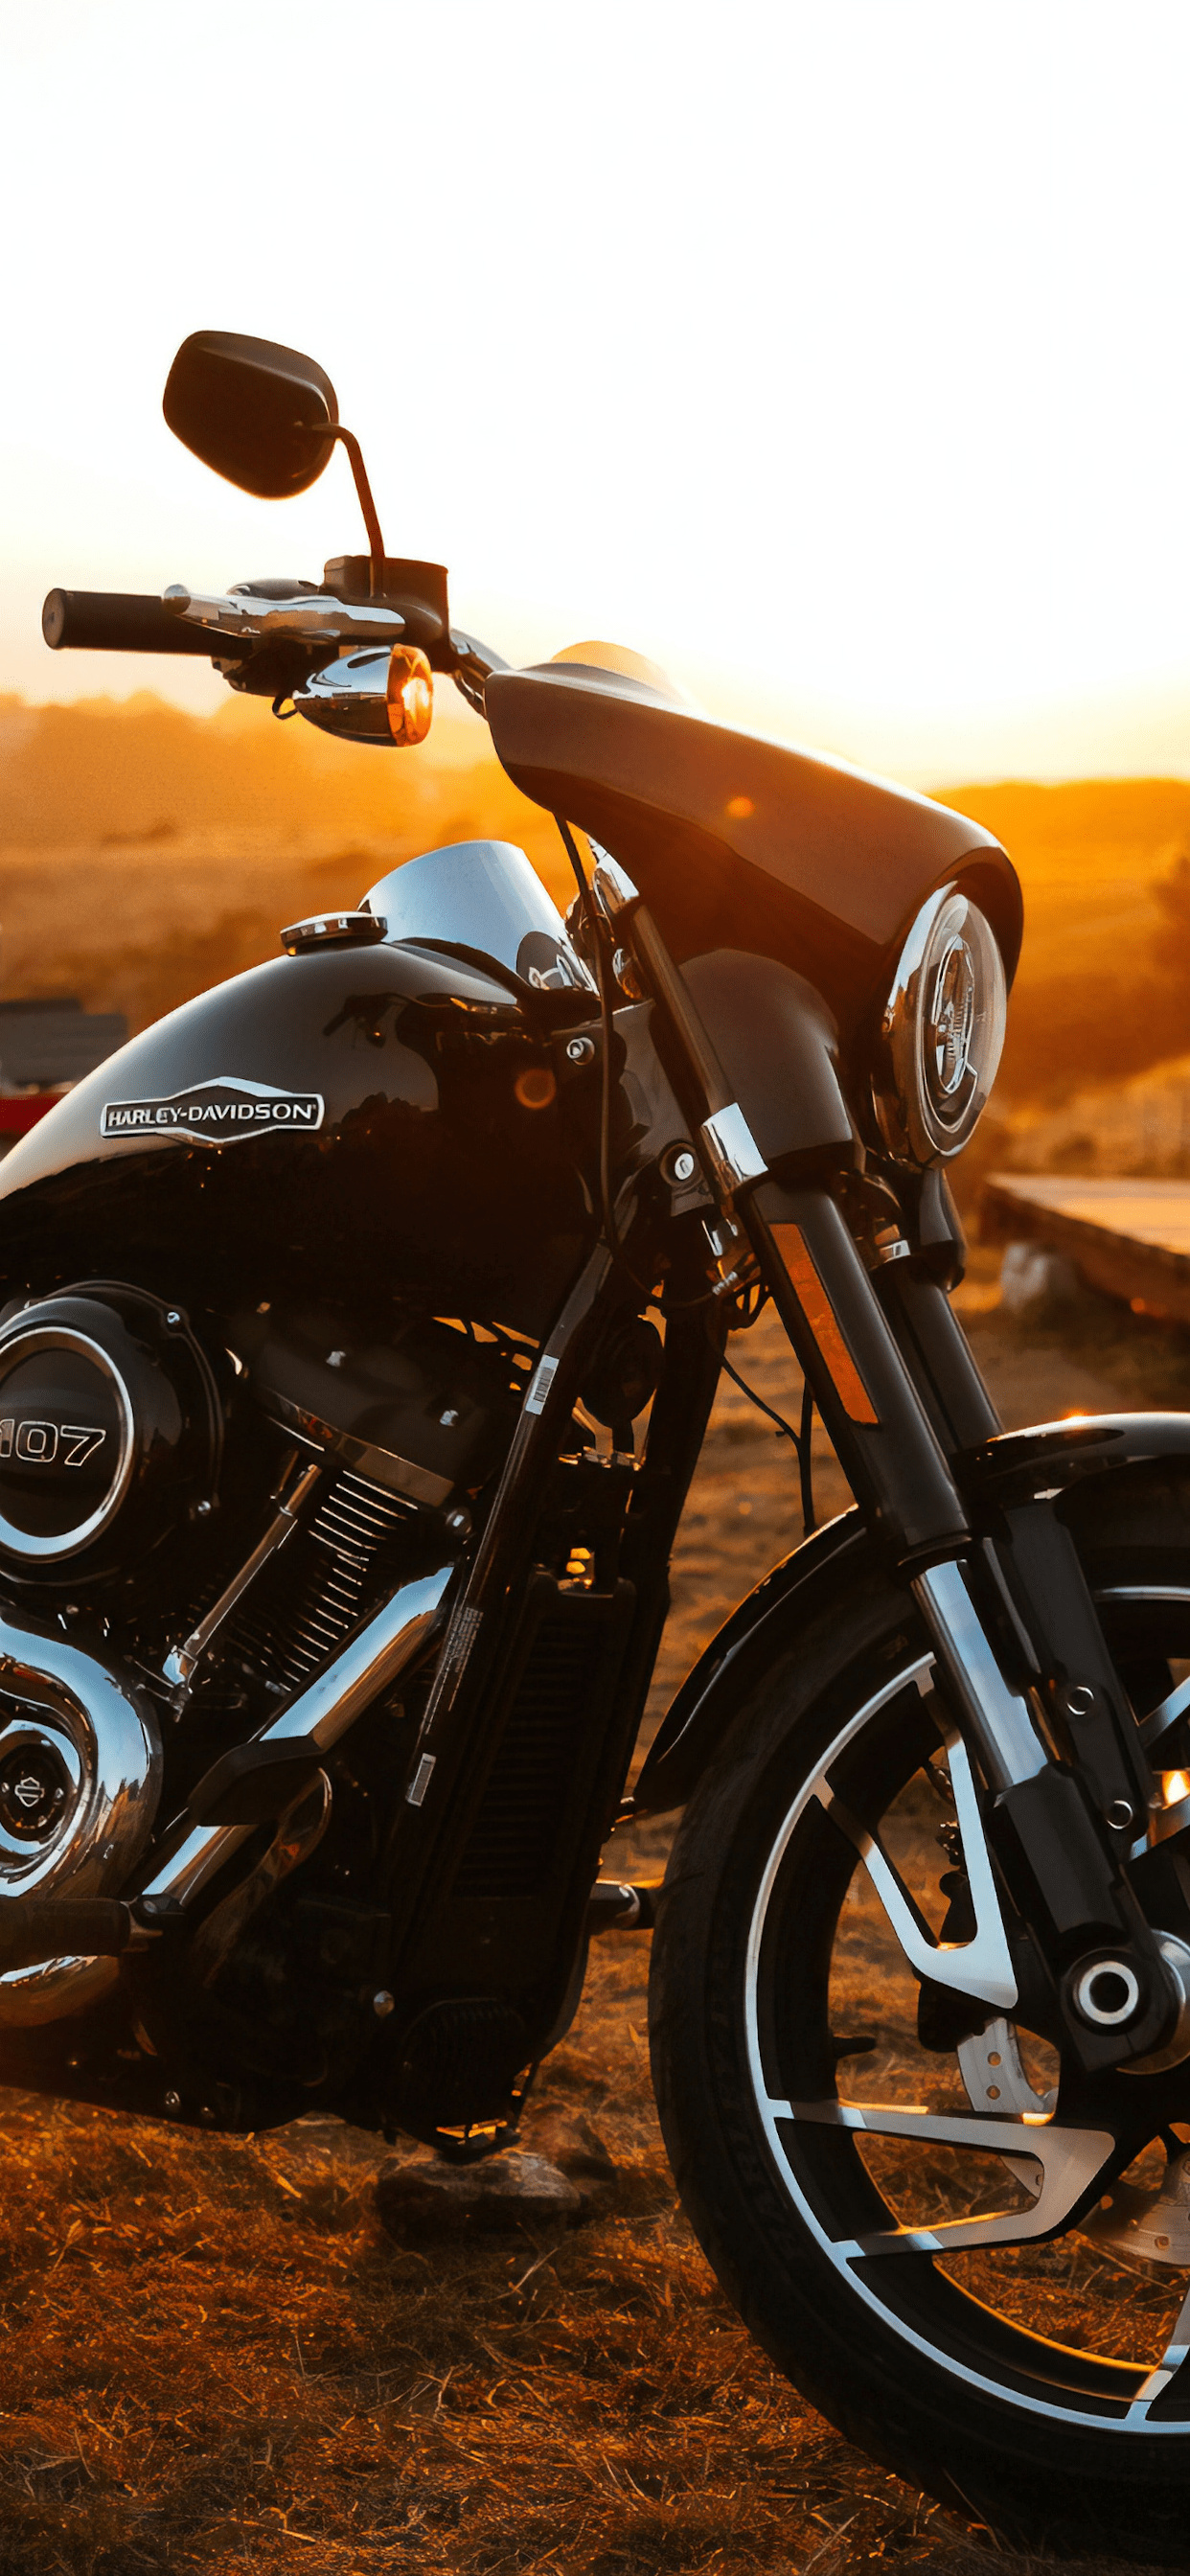 Harley Davidson wallpapers, Motorcycle enthusiasts, Harley culture, Biker lifestyles, 1250x2690 HD Phone